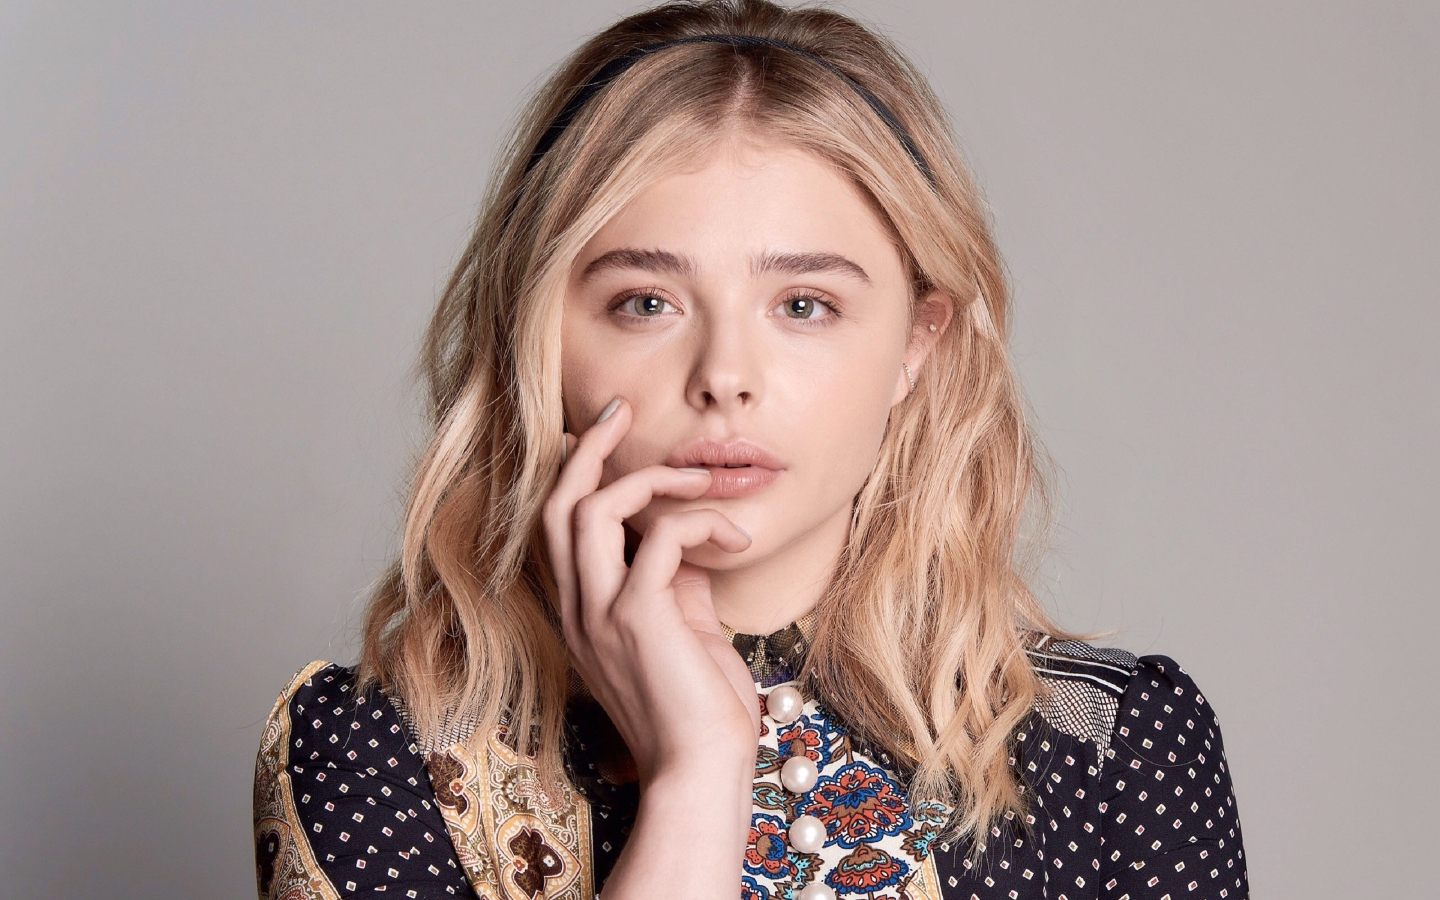 Chloe Moretz Looking Lovely for 1440 x 900 widescreen resolution